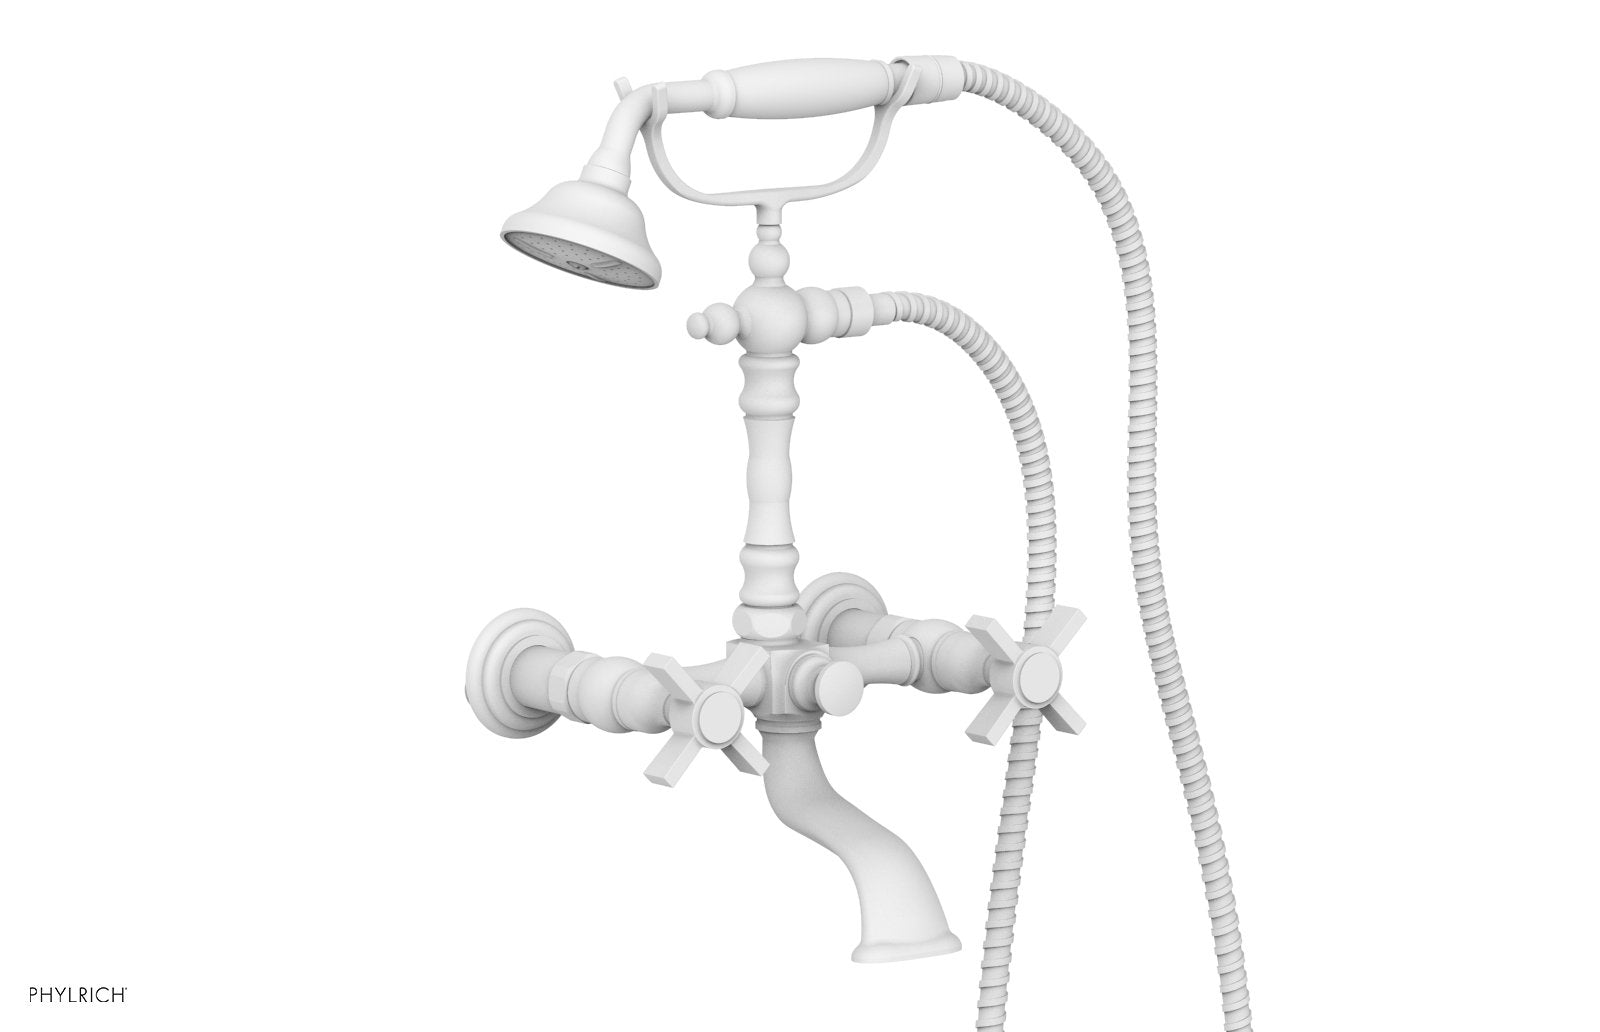 Phylrich BASIC Exposed Tub & Hand Shower - Blade Cross Handle